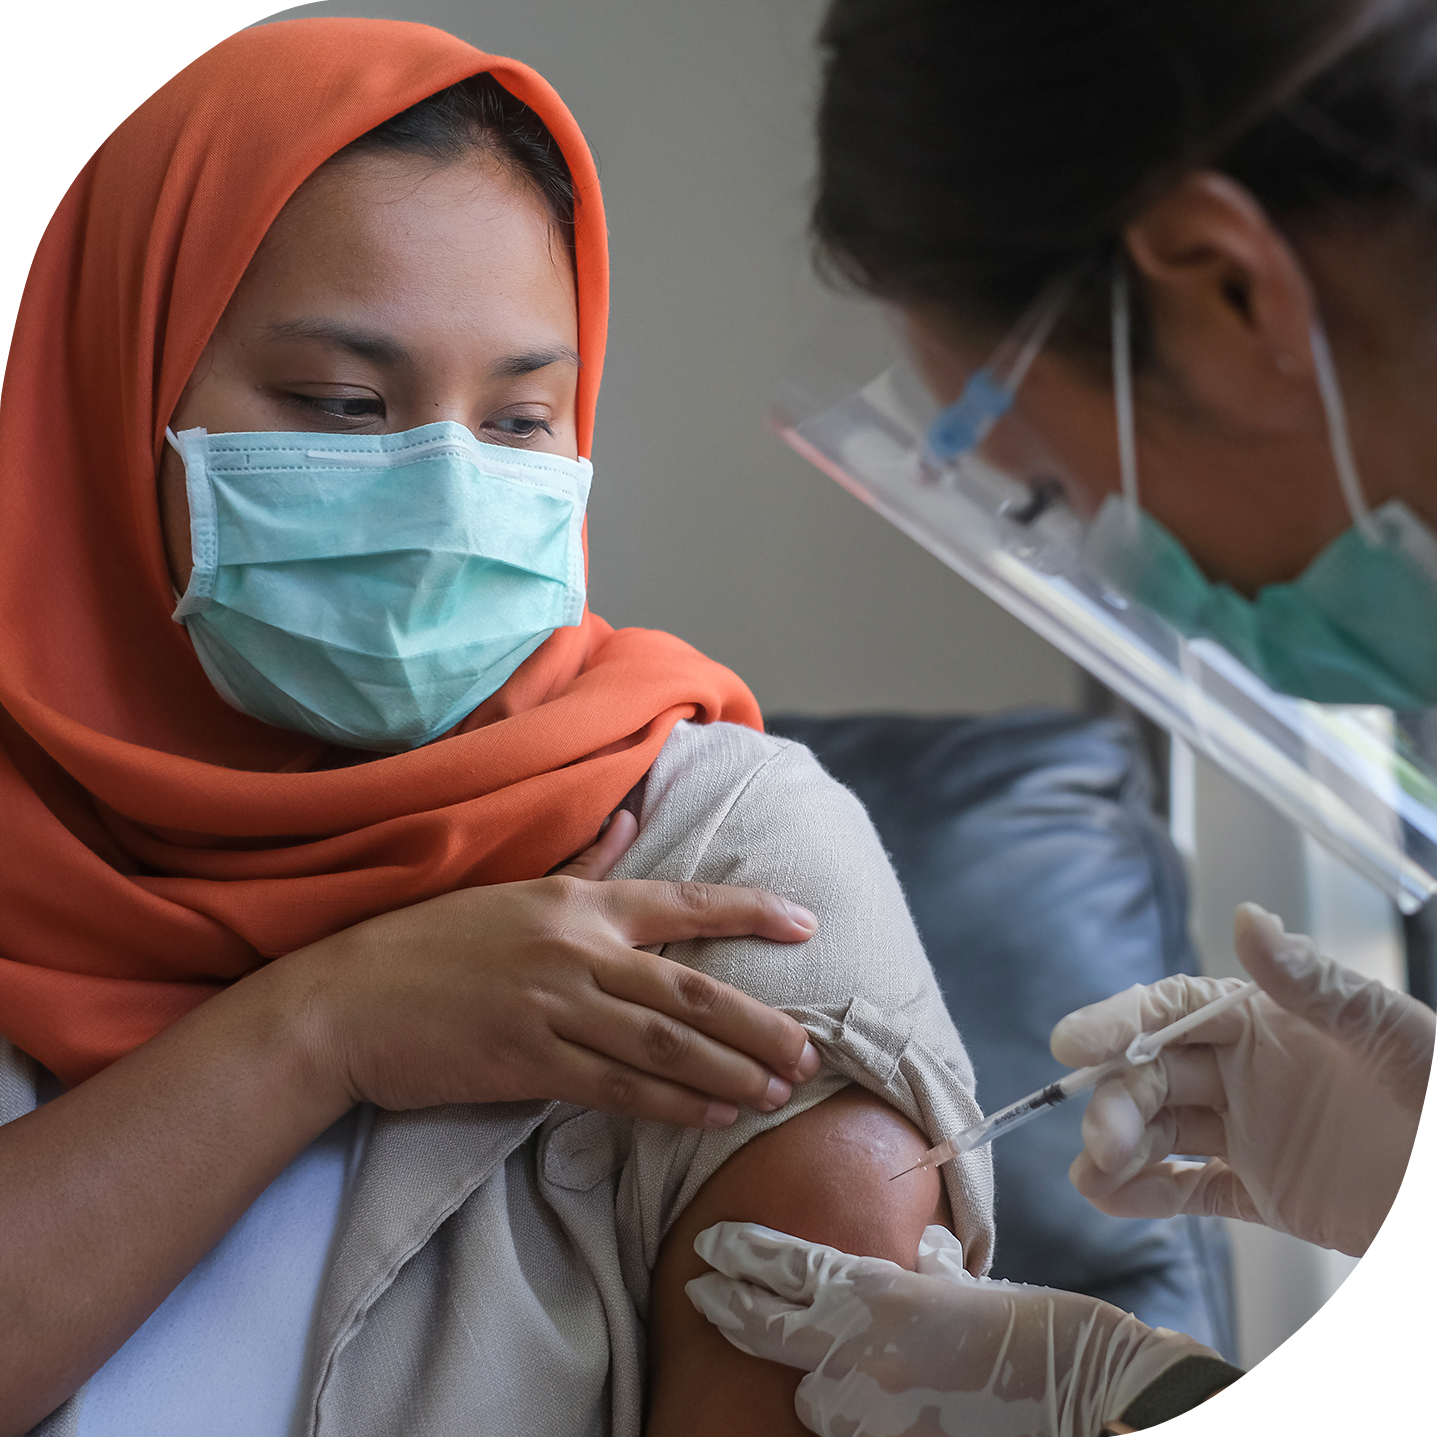 A young woman wearing an orange hijab is receiving her vaccine.